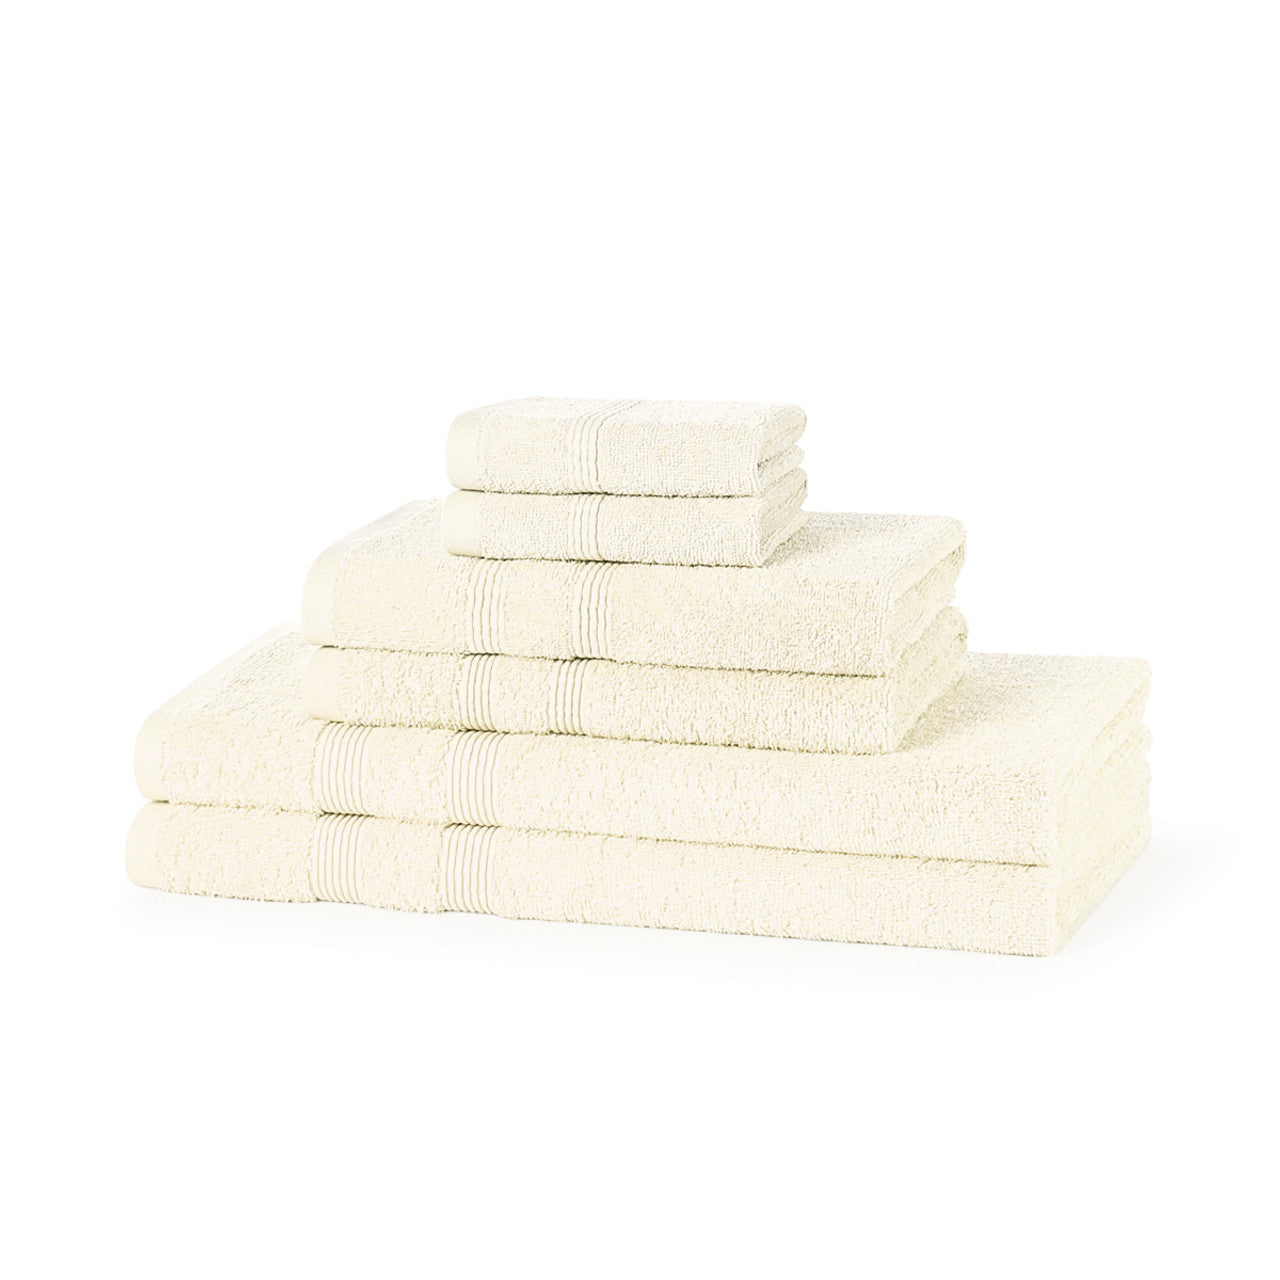 600 GSM Quality 6-Piece Towel Bale - Includes 2 Each of Face, Hand & Bath Towels